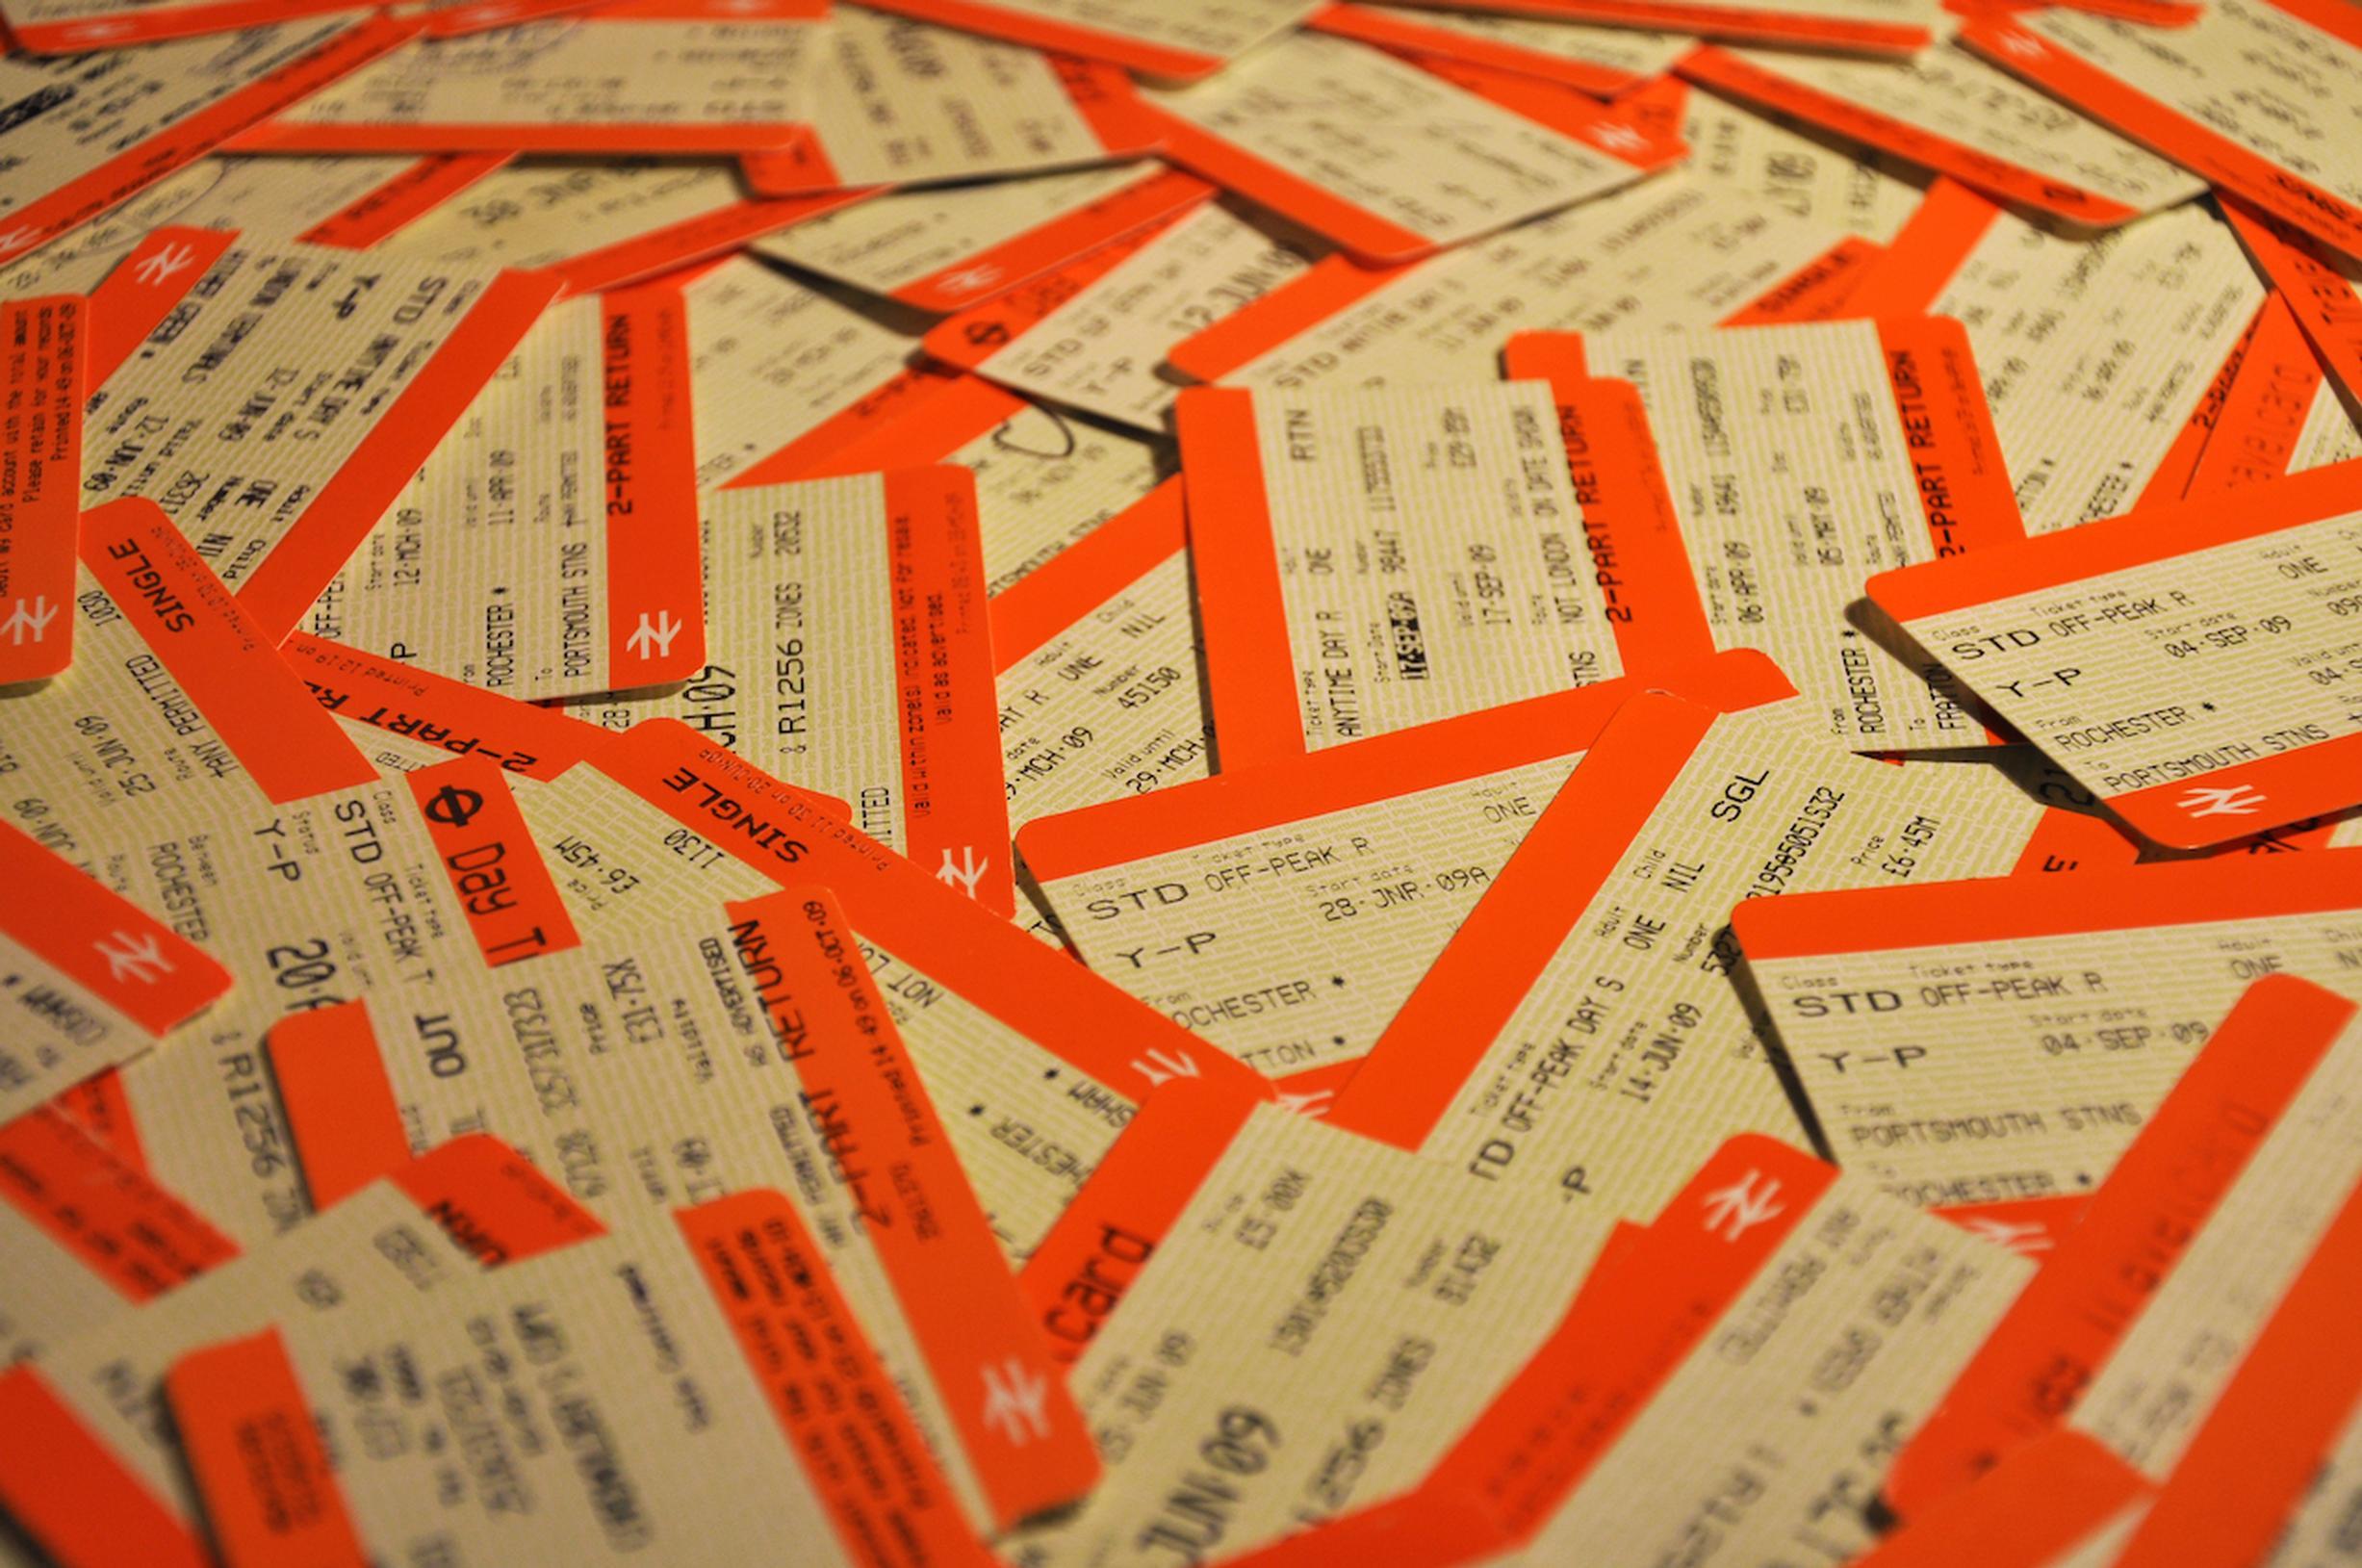 Deal involves a one-off price increase on Day Travelcards for travel from stations outside Zones 1-6